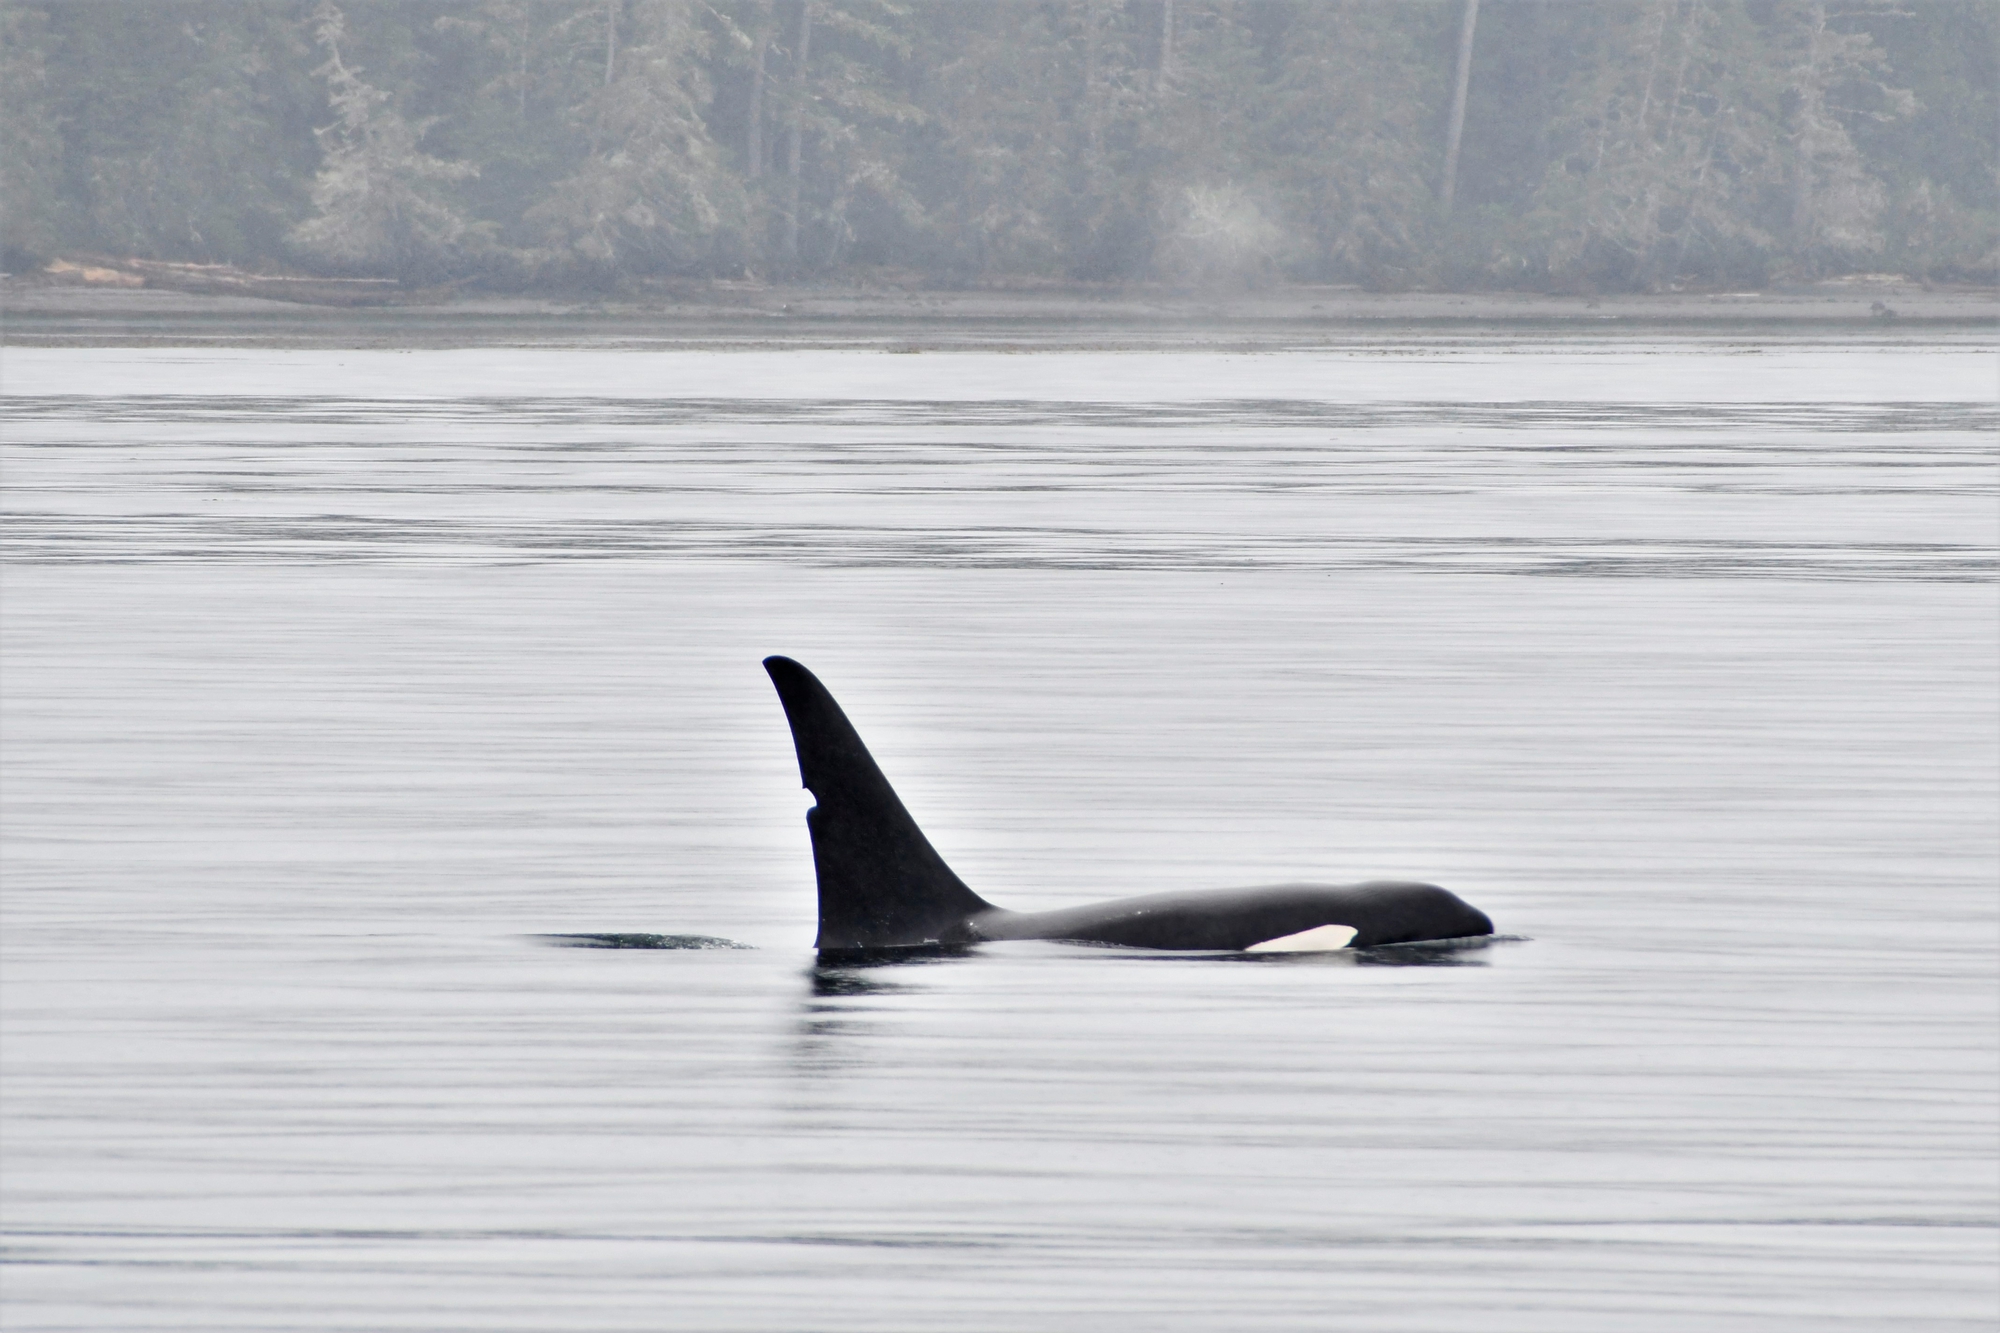 The dorsal fin and back of an orca whale pokes out of the water